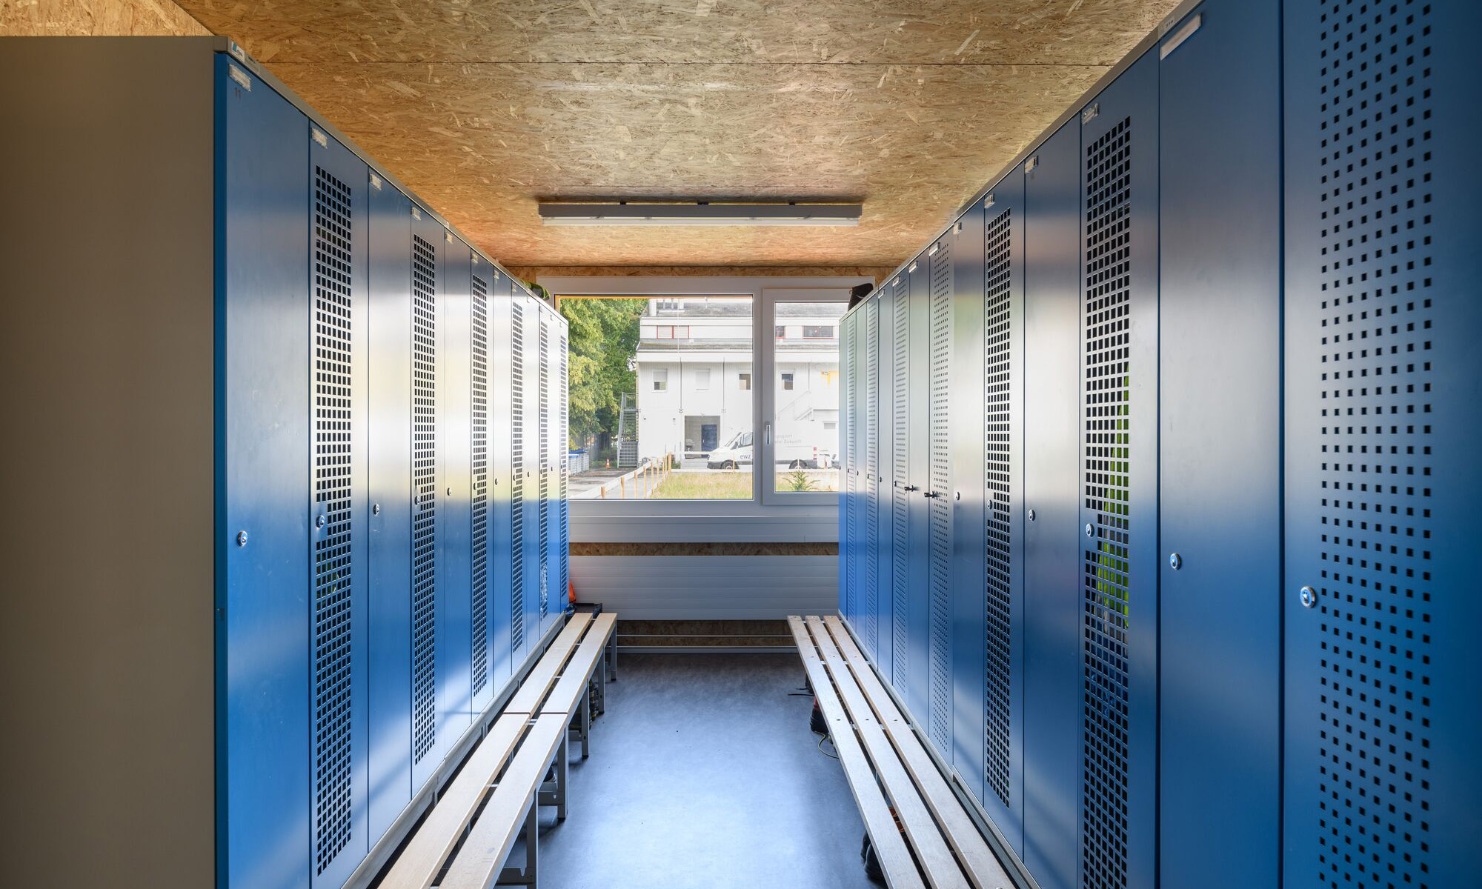 Changing room with blue lockers in the temporary ewz office in Altstetten